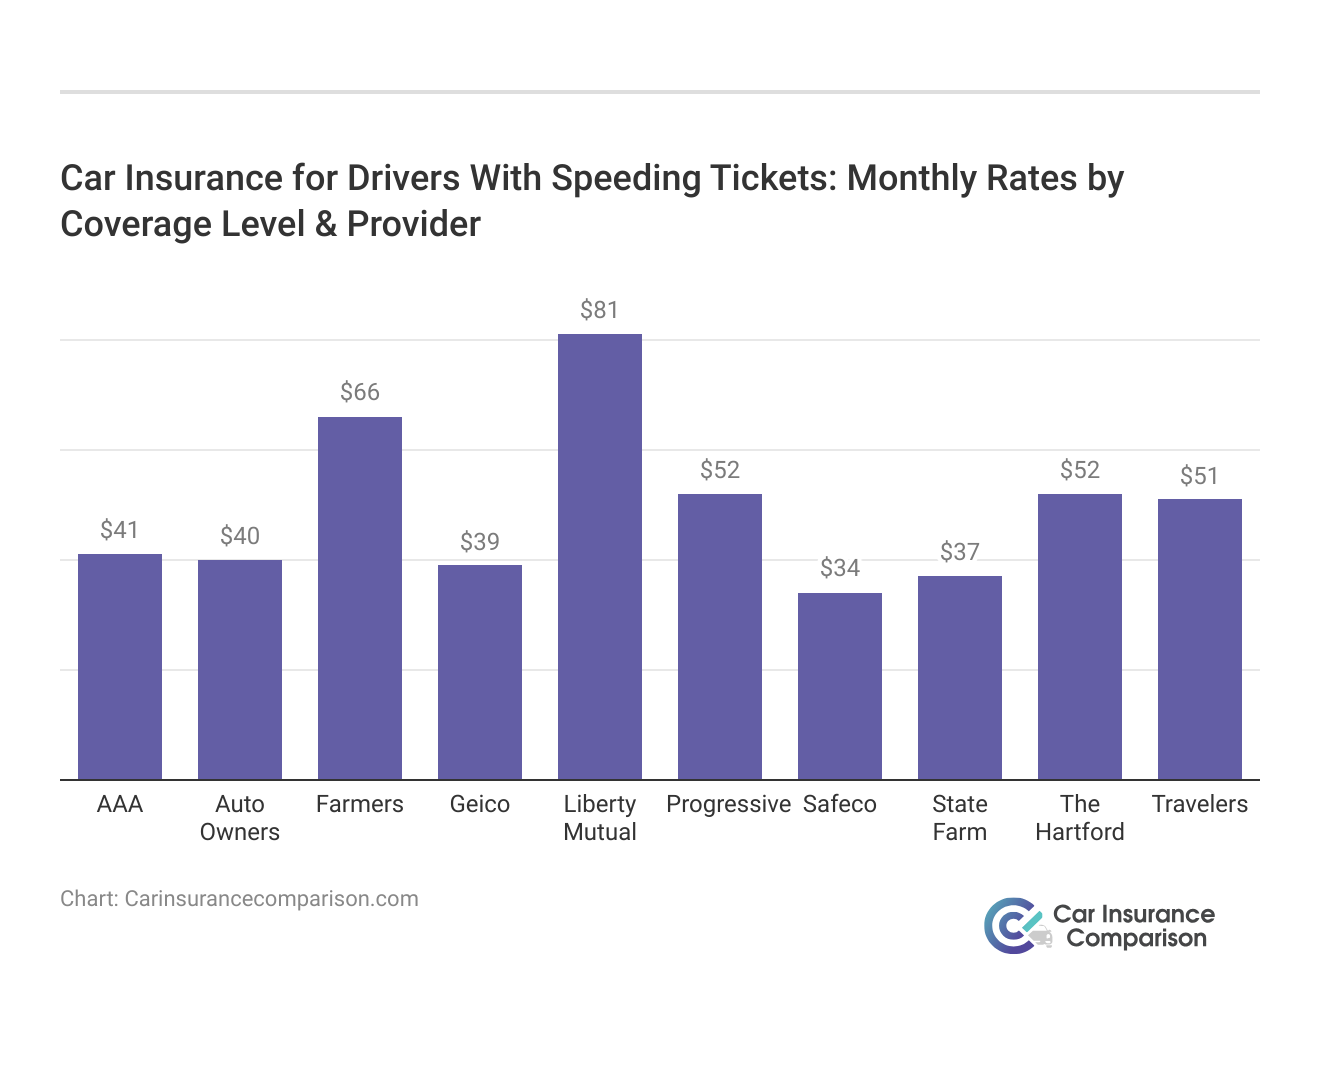 <h3>Car Insurance for Drivers With Speeding Tickets: Monthly Rates by Coverage Level & Provider</h3>